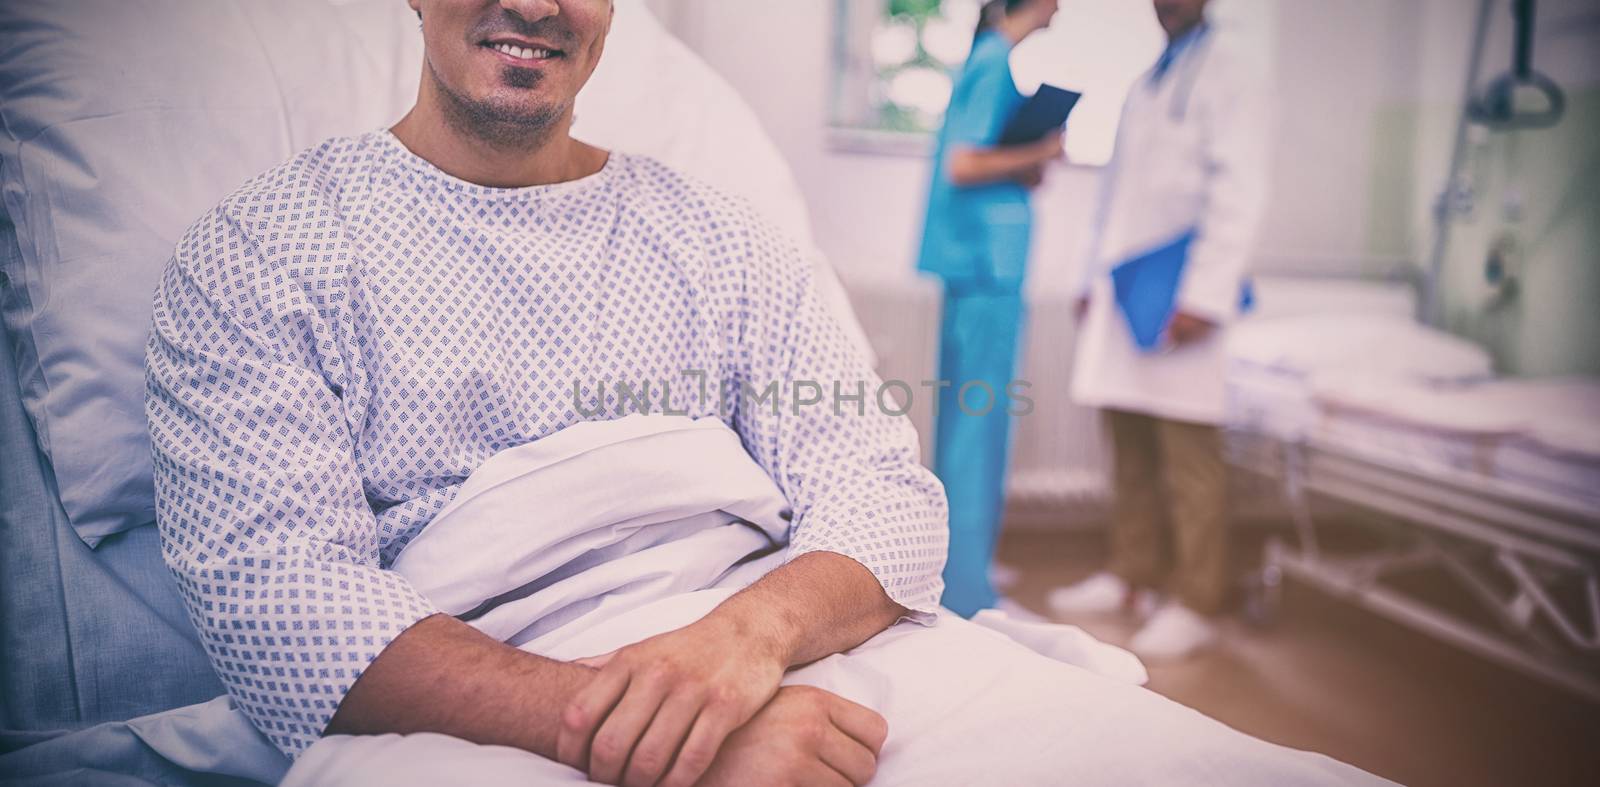 Portrait of smiling patient sitting on bed in hospital